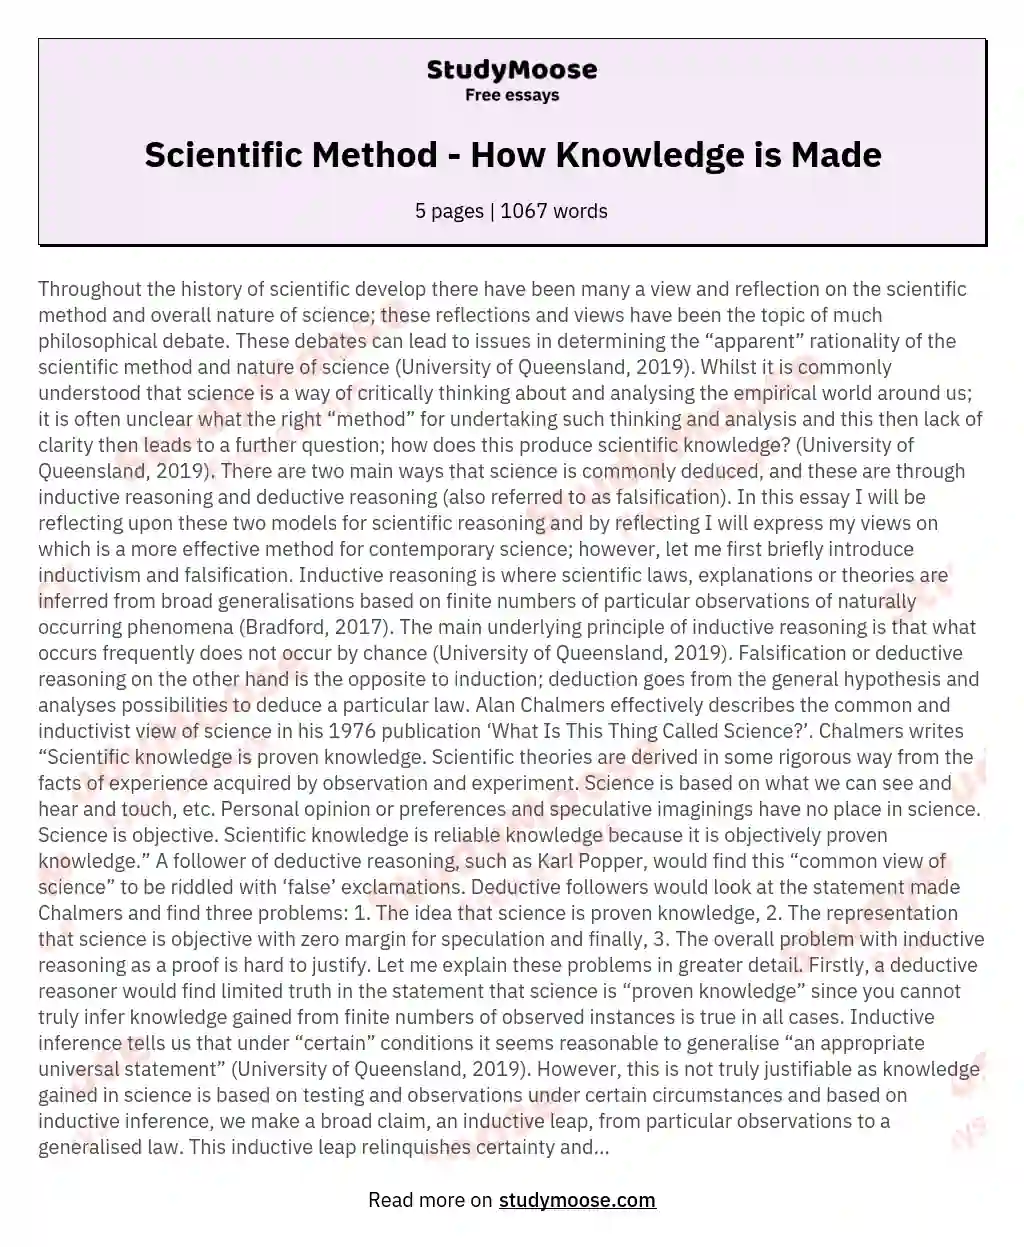 Scientific Method - How Knowledge is Made